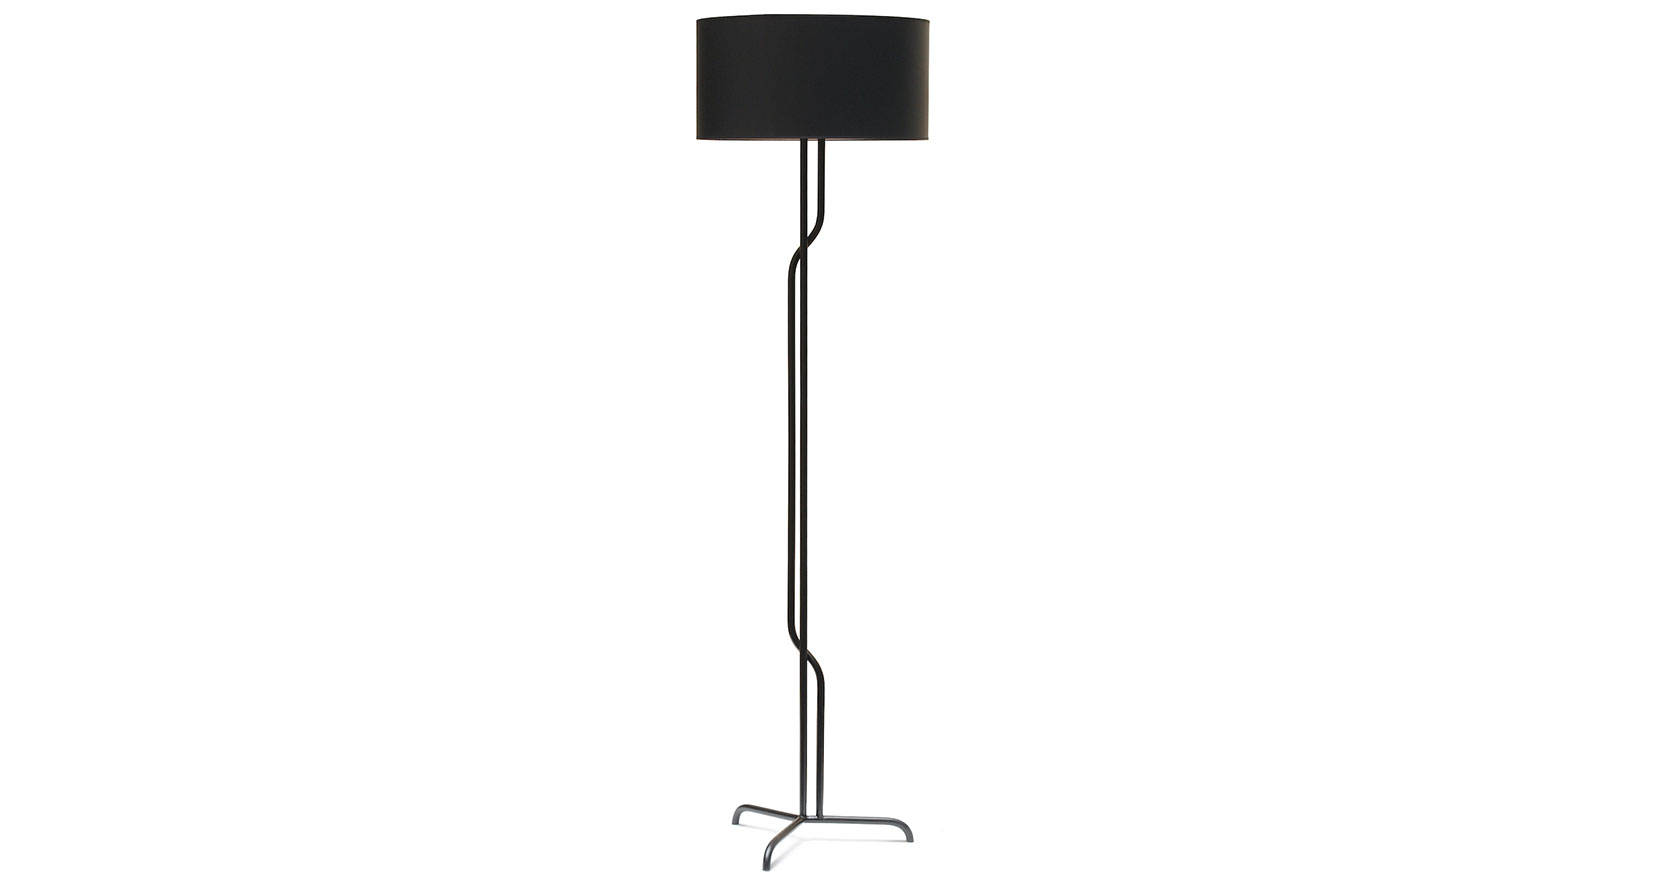 Eric Jourdan, 50s style floor lamp with 3 feet supporting 2 stems that intersect in zig zag in black wrought iron, and a round black lampshade